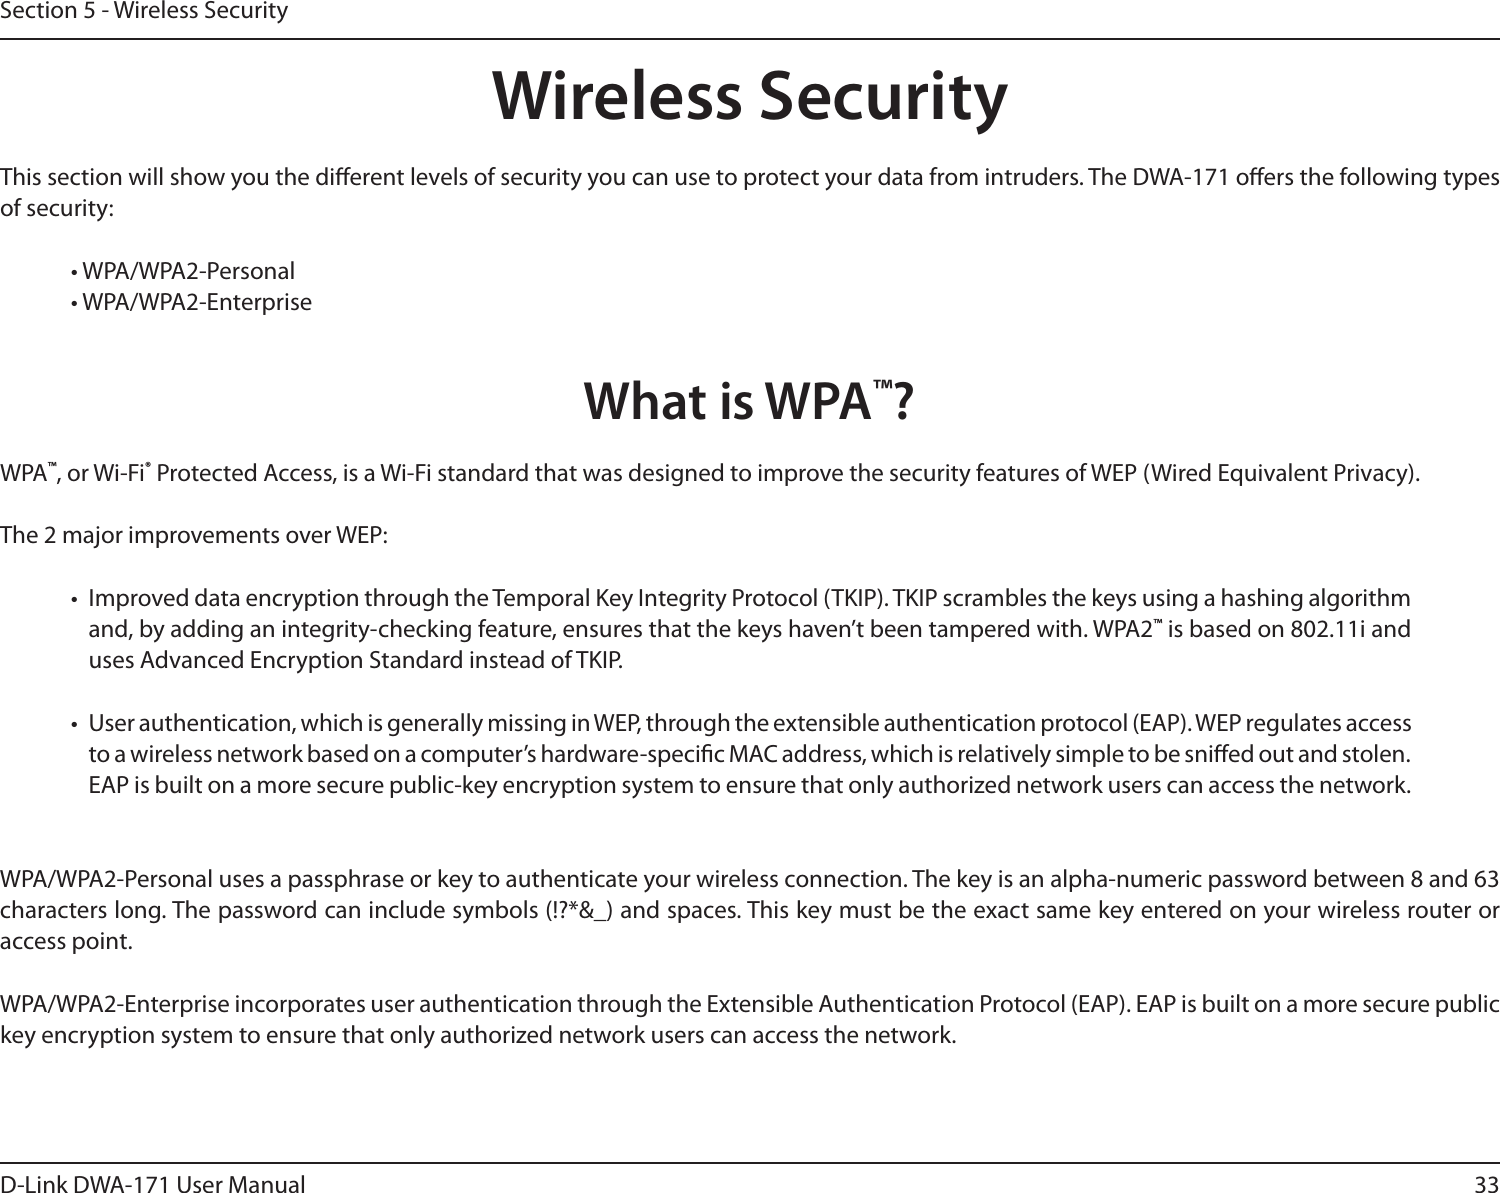 33D-Link DWA-171 User ManualSection 5 - Wireless SecurityWireless SecurityThis section will show you the dierent levels of security you can use to protect your data from intruders. The DWA-171 oers the following types of security:• WPA/WPA2-Personal    • WPA/WPA2-EnterpriseWhat is WPA™?WPA™, or Wi-Fi® Protected Access, is a Wi-Fi standard that was designed to improve the security features of WEP (Wired Equivalent Privacy).  The 2 major improvements over WEP: •  Improved data encryption through the Temporal Key Integrity Protocol (TKIP). TKIP scrambles the keys using a hashing algorithm and, by adding an integrity-checking feature, ensures that the keys haven’t been tampered with. WPA2™ is based on 802.11i and uses Advanced Encryption Standard instead of TKIP.•  User authentication, which is generally missing in WEP, through the extensible authentication protocol (EAP). WEP regulates access to a wireless network based on a computer’s hardware-specic MAC address, which is relatively simple to be snied out and stolen. EAP is built on a more secure public-key encryption system to ensure that only authorized network users can access the network.WPA/WPA2-Personal uses a passphrase or key to authenticate your wireless connection. The key is an alpha-numeric password between 8 and 63 characters long. The password can include symbols (!?*&amp;_) and spaces. This key must be the exact same key entered on your wireless router or access point.WPA/WPA2-Enterprise incorporates user authentication through the Extensible Authentication Protocol (EAP). EAP is built on a more secure public key encryption system to ensure that only authorized network users can access the network.